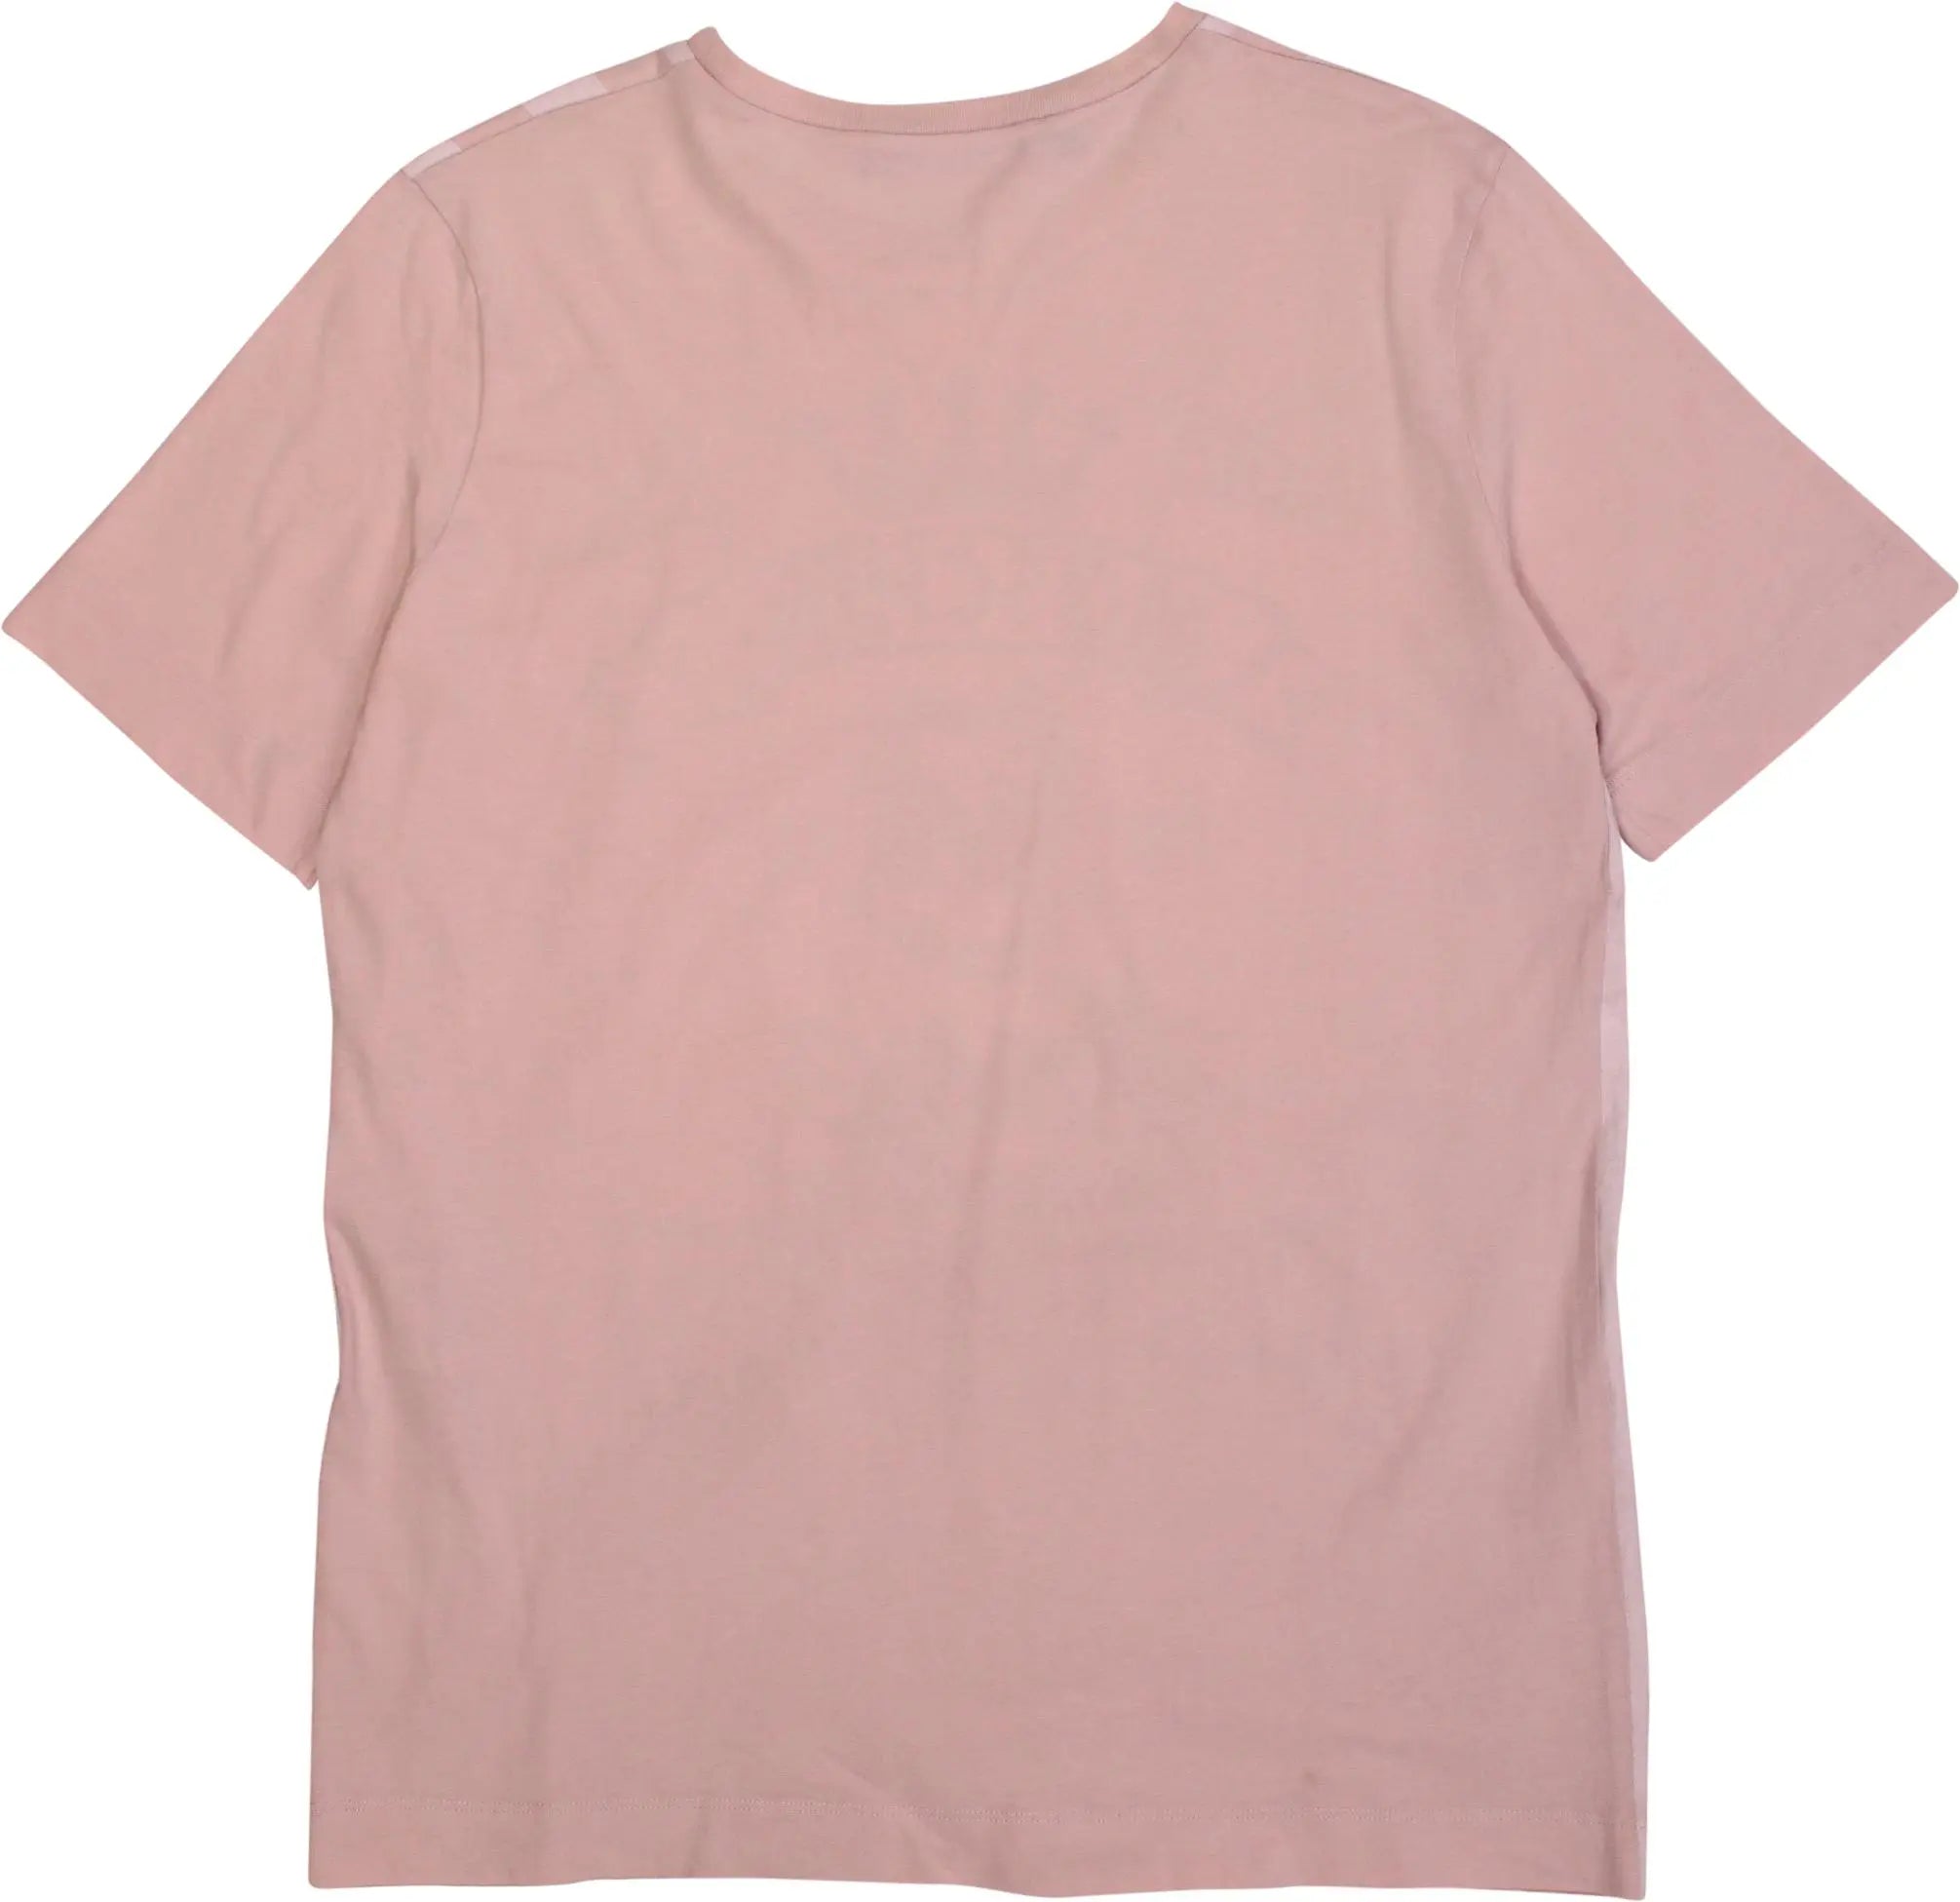 Moschino - Pink T-shirt by Love Moschino- ThriftTale.com - Vintage and second handclothing